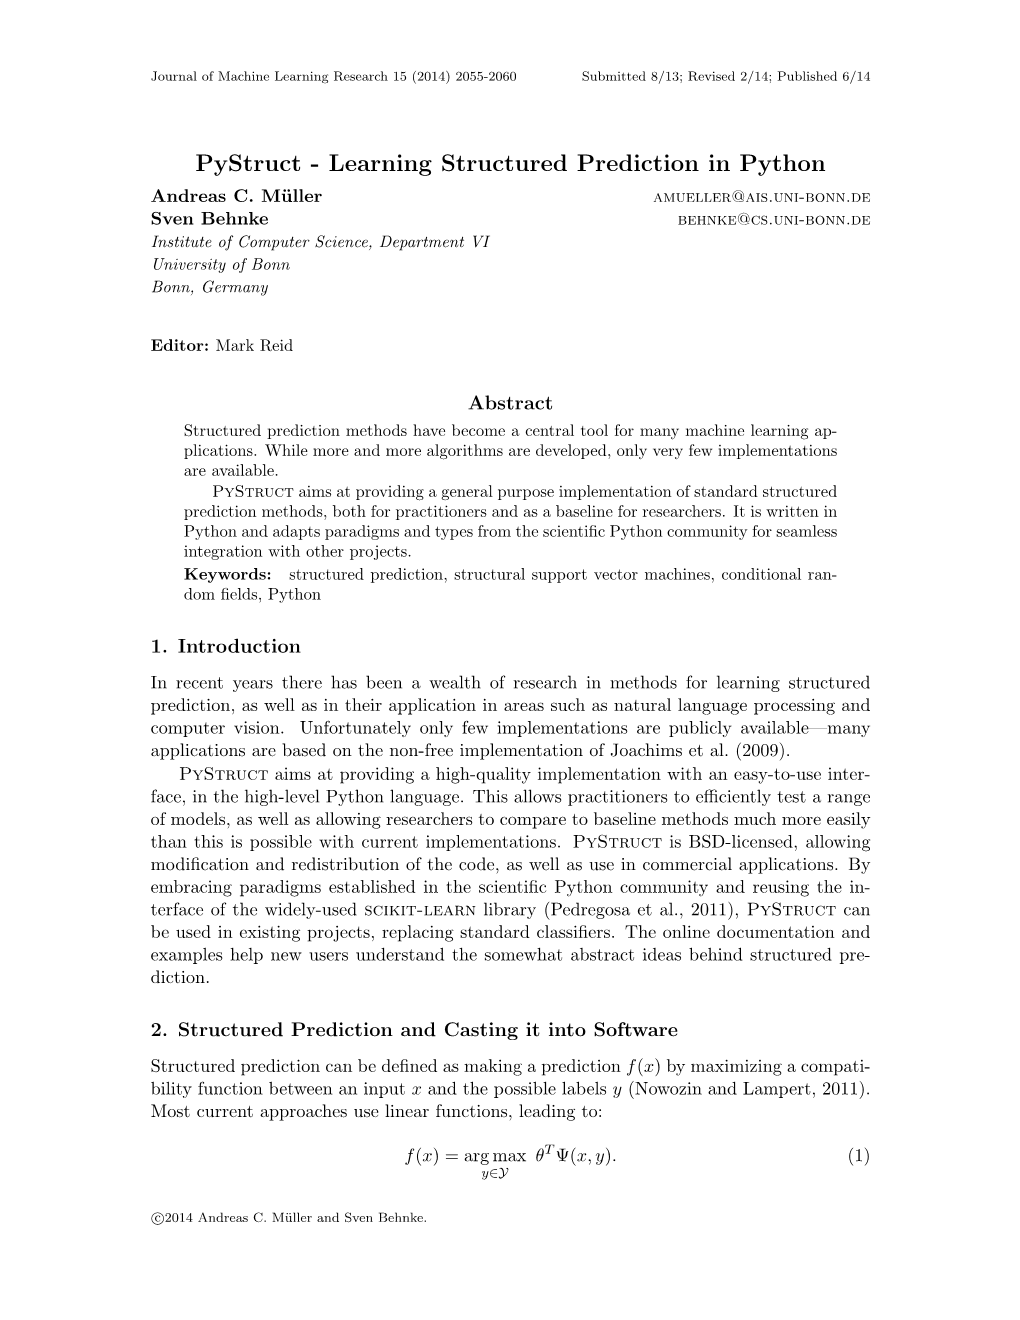 Pystruct - Learning Structured Prediction in Python Andreas C